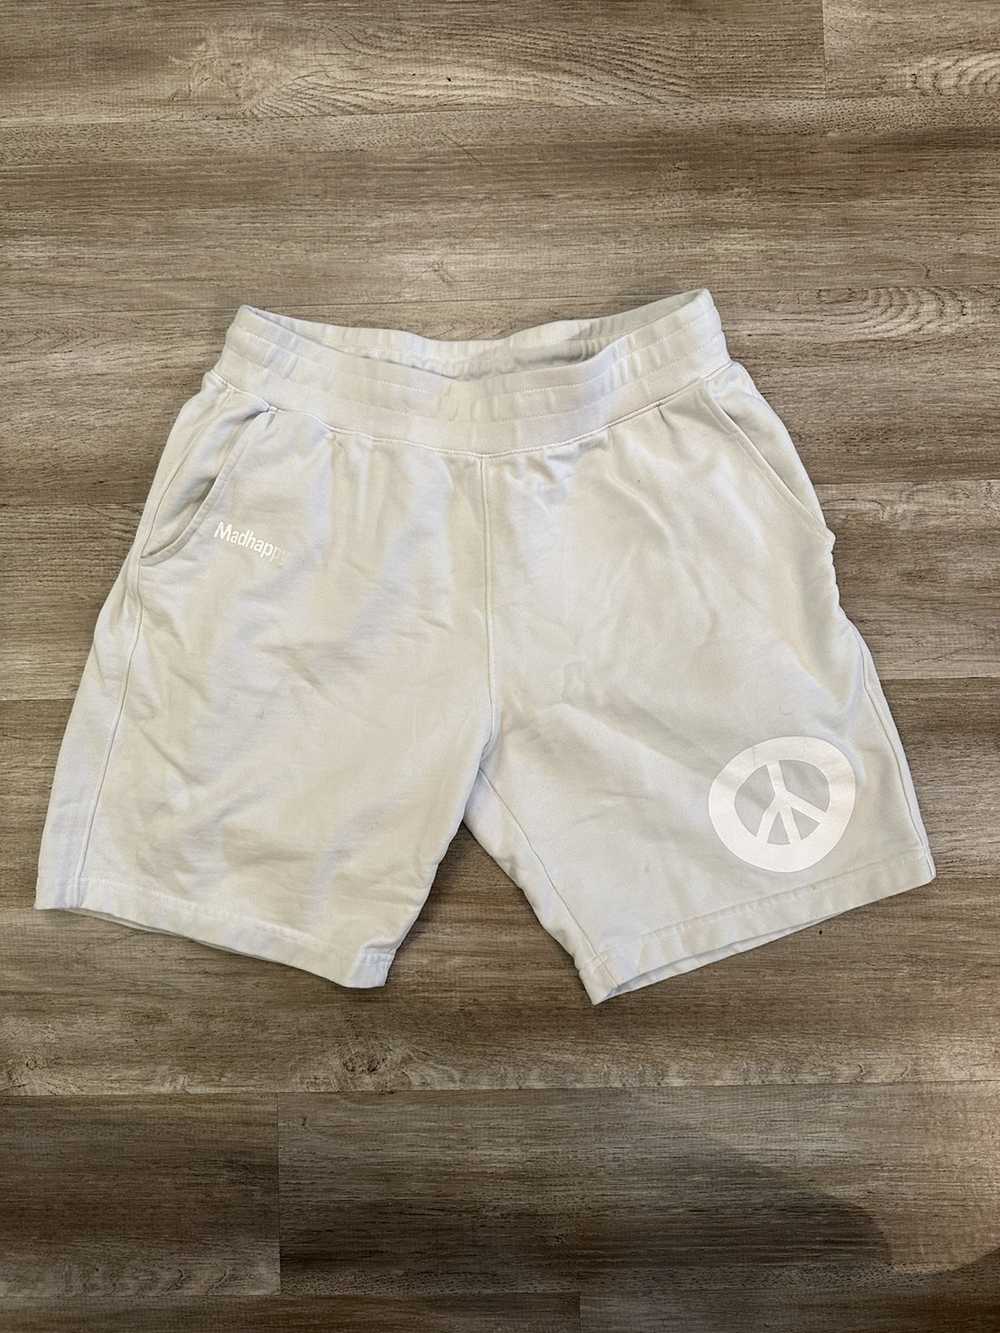 Madhappy Madhappy Peace Shorts Size L - image 1